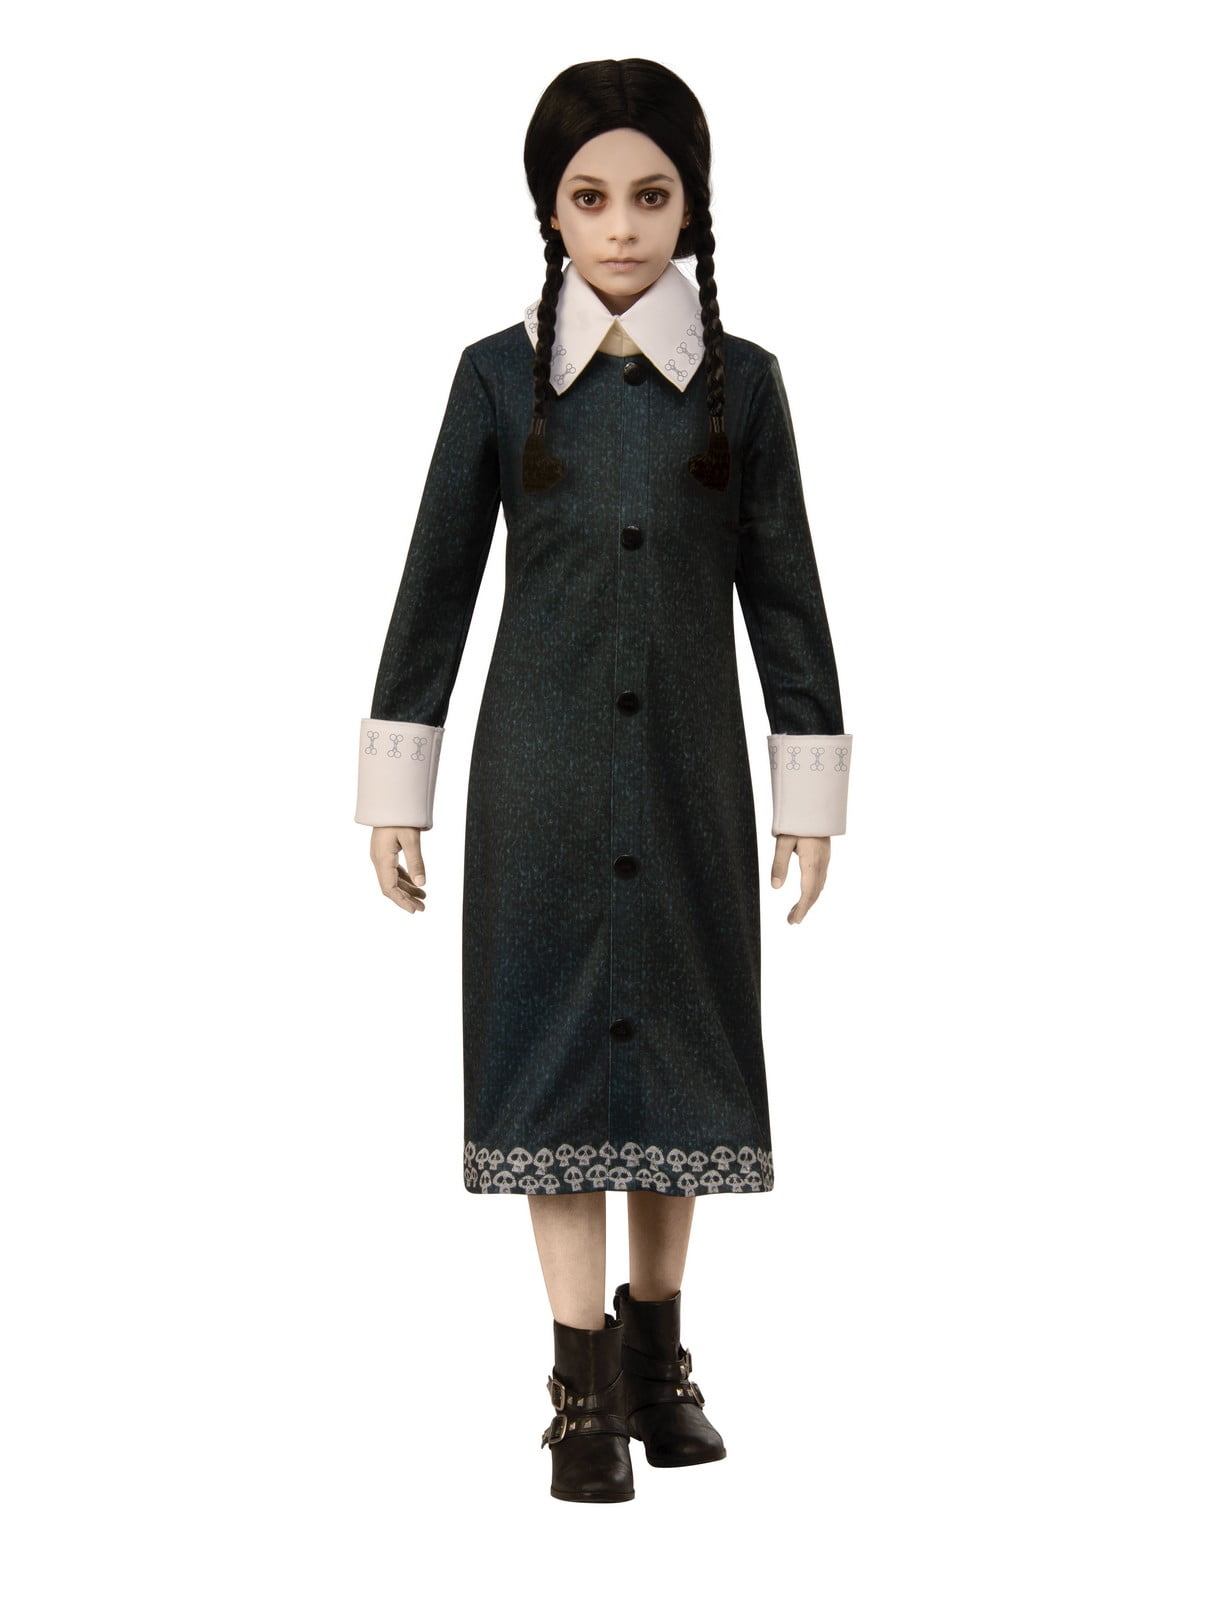 Rubie's Costumes Large The Addams Family Wednesday Addams